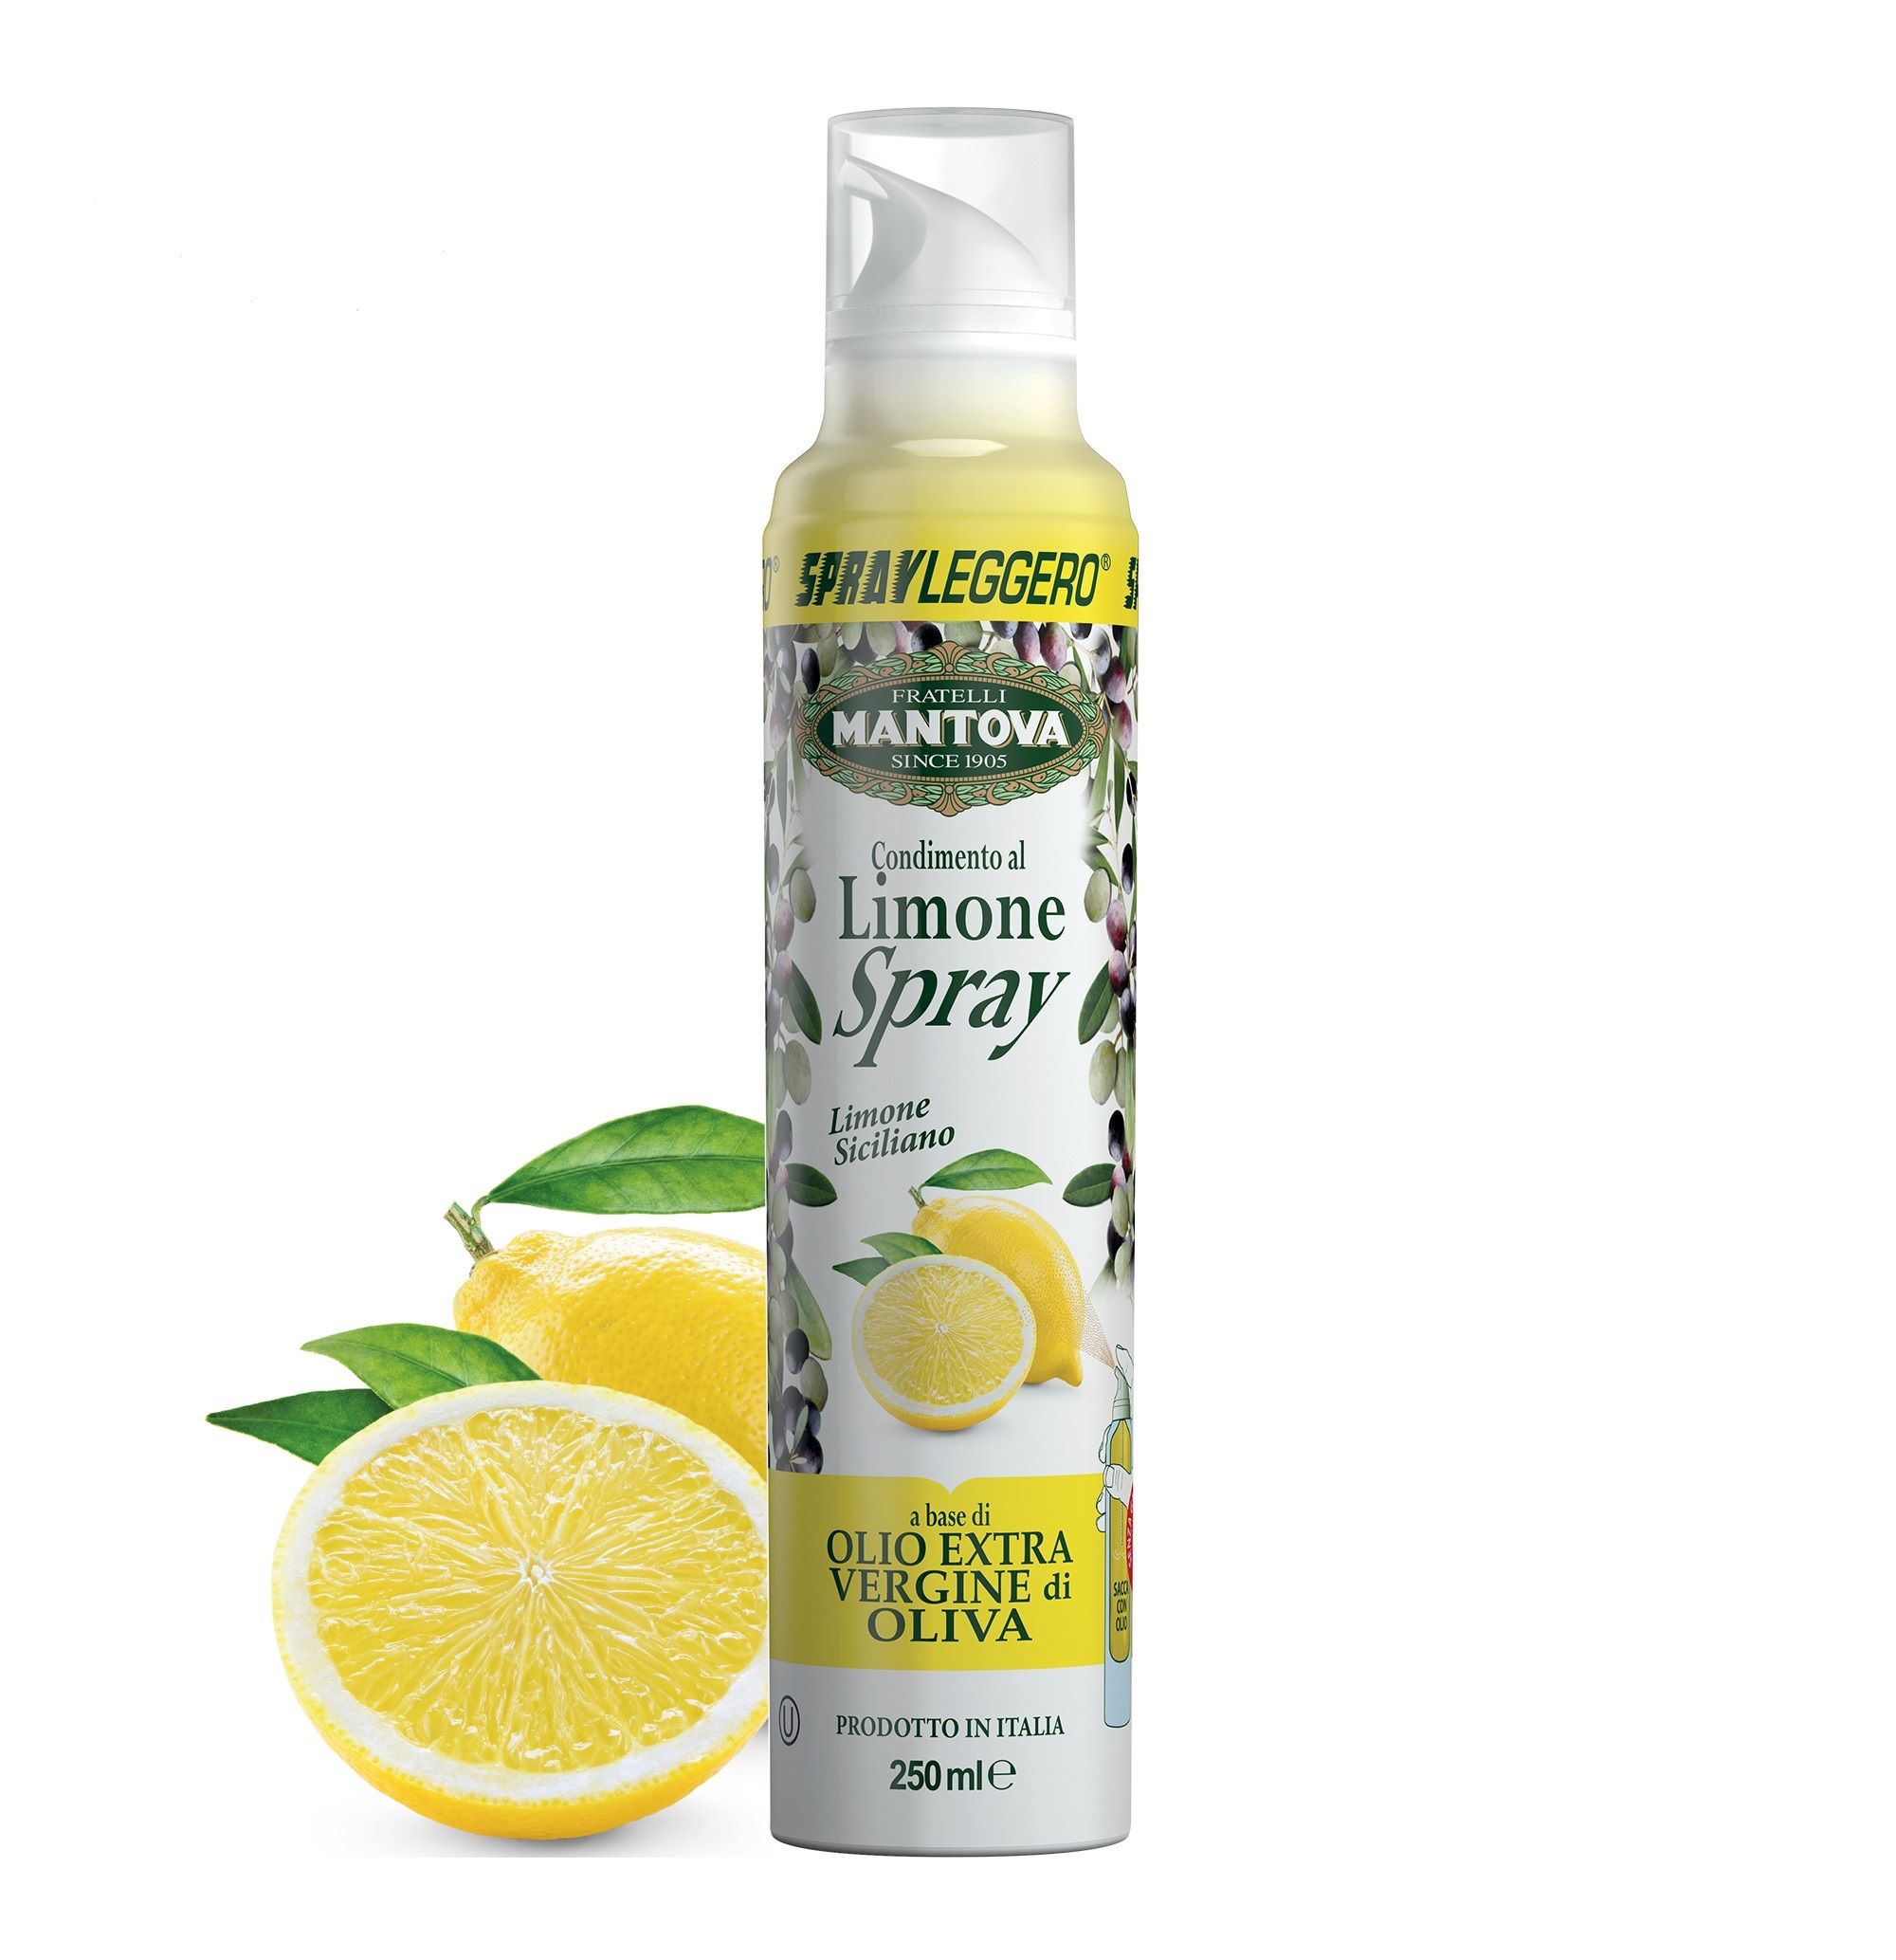 Olive Oil: Mantova Spray Extra Virgin Olive Oil Infused with Lemon 250ml  Imported from Italy